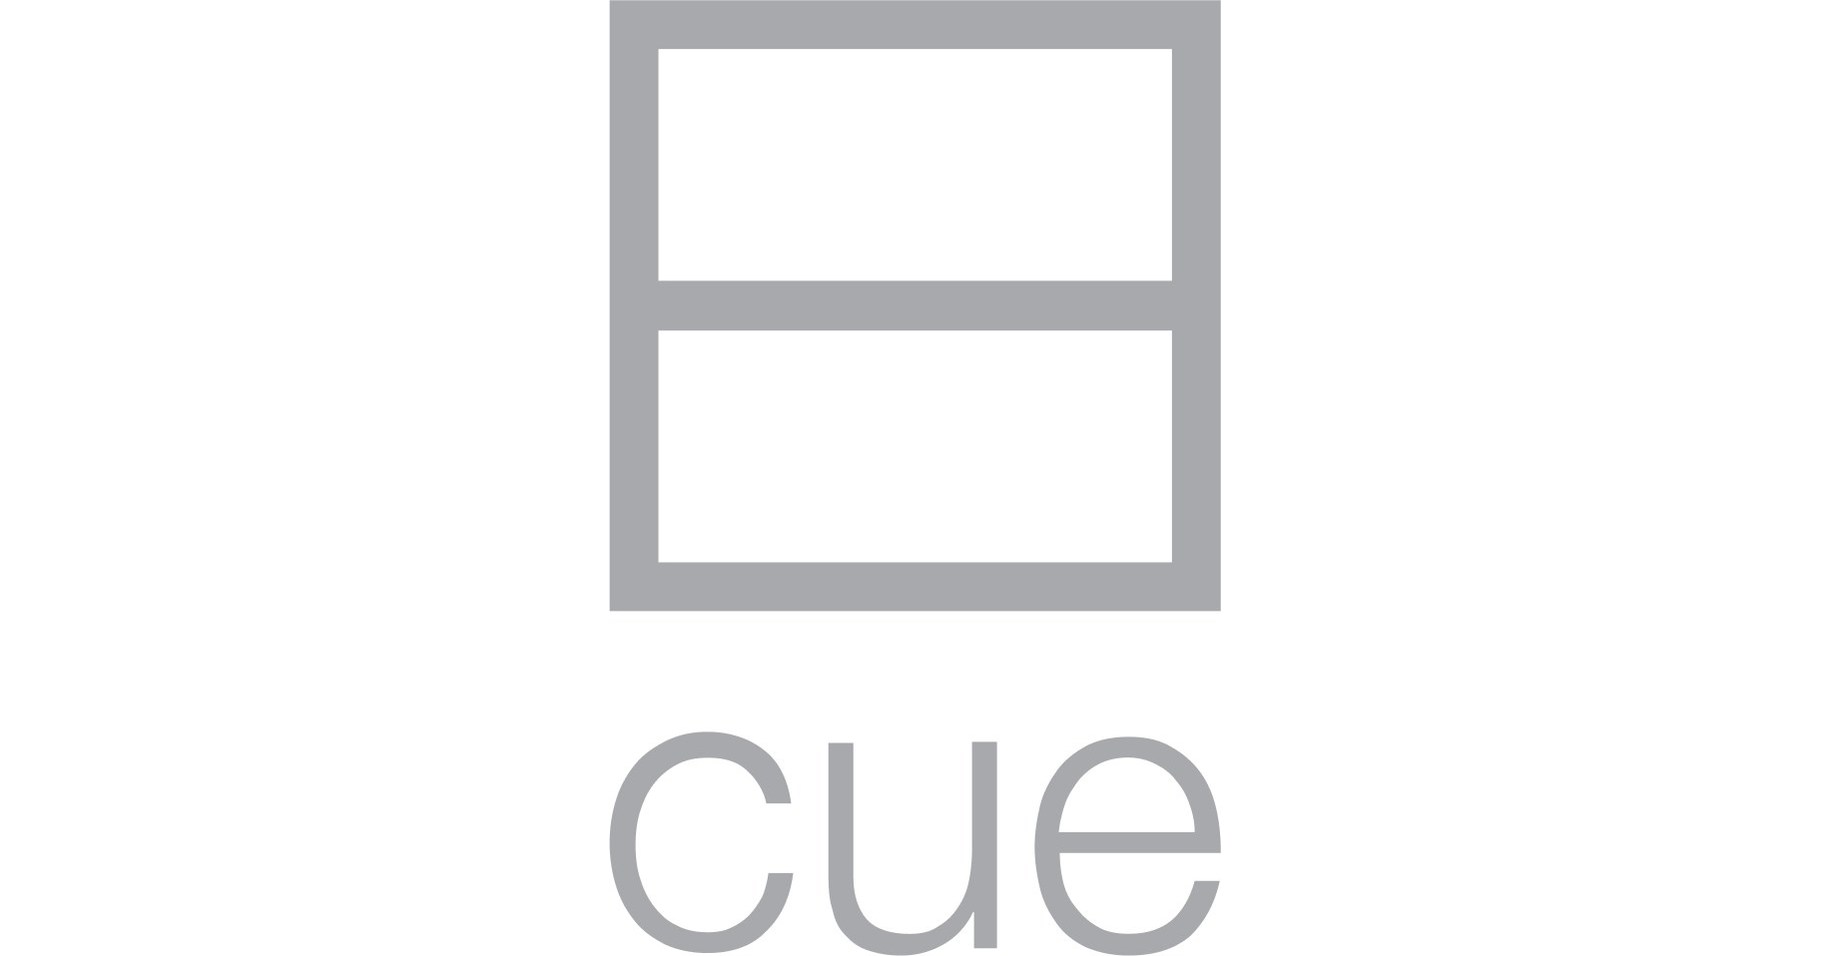 Cue Health Announces Completion Of 235 Million Private Financing To Accelerate Growth